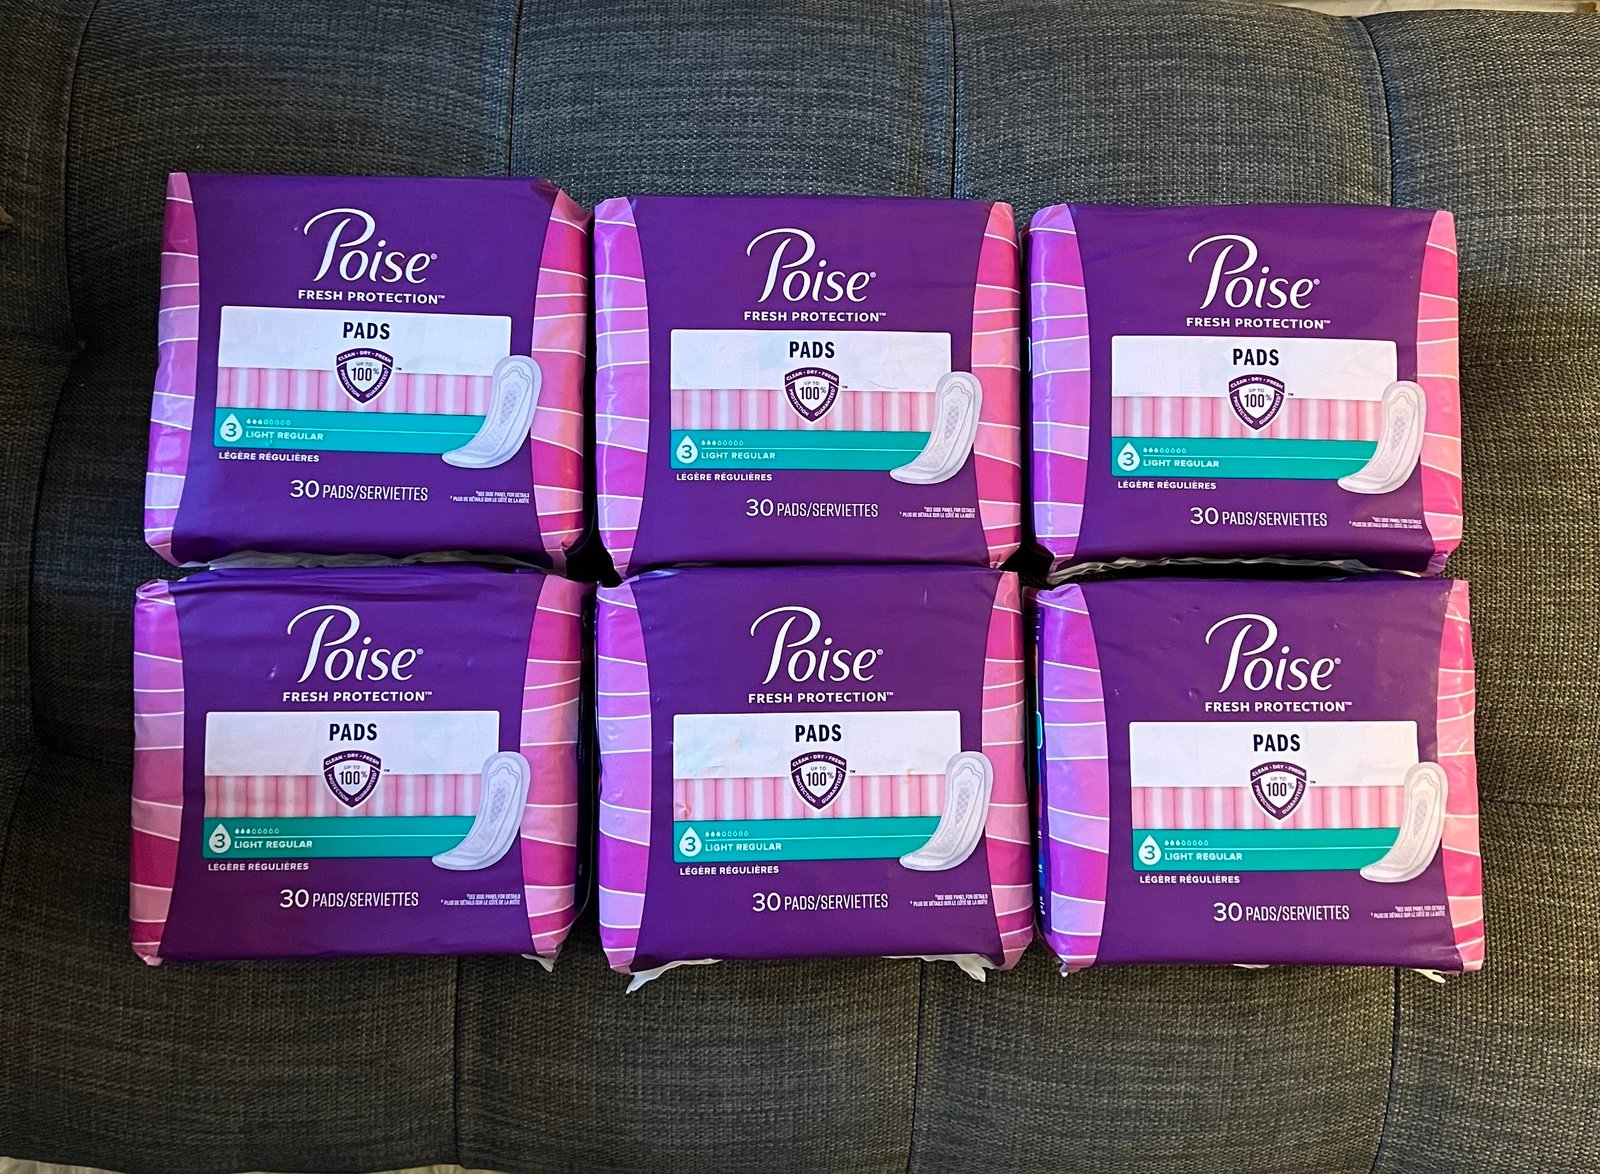 6 x Poise Pads 3 Drops Light Regular, 30 pads (180 pads total) 12ty07q0S